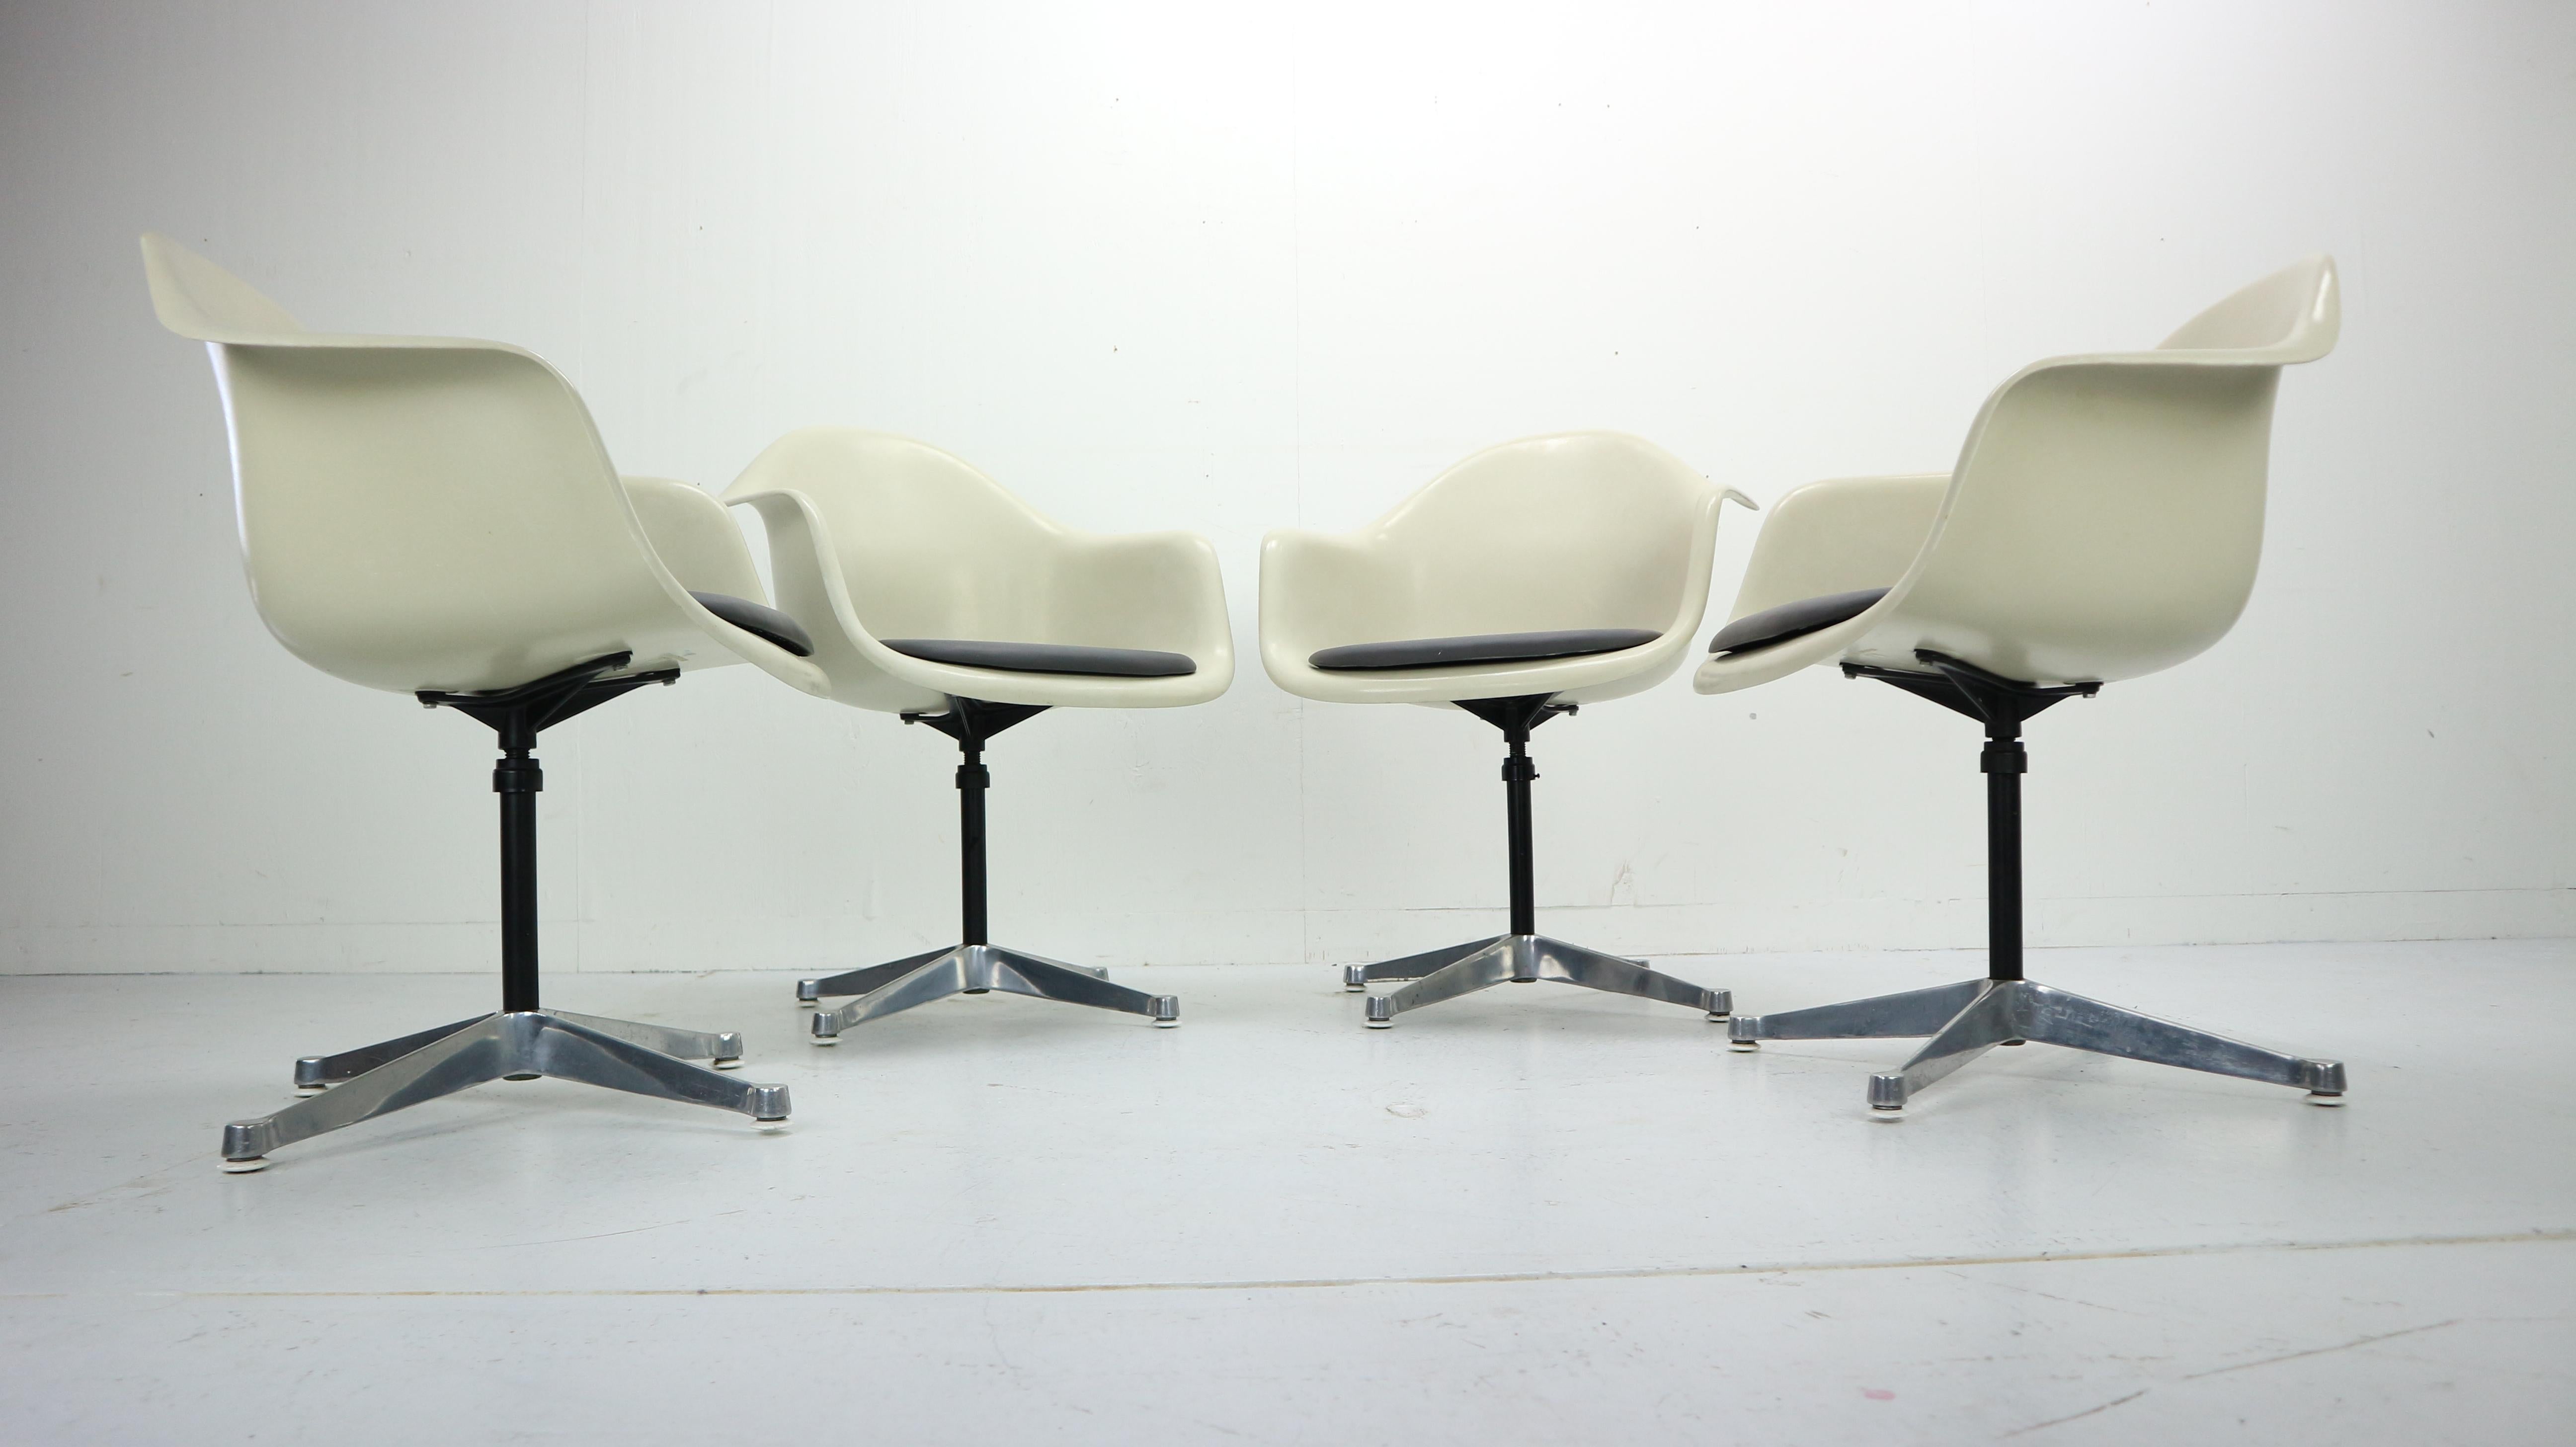 Set of 4 Mid-Century Modern swivel chairs designed by Charles Eames in 1950s.
This is one of the very well classic designs by Charles Eames made for the Herman Miller Company. 

The fibreglass model bucket formed tub chair with arms, raised on a